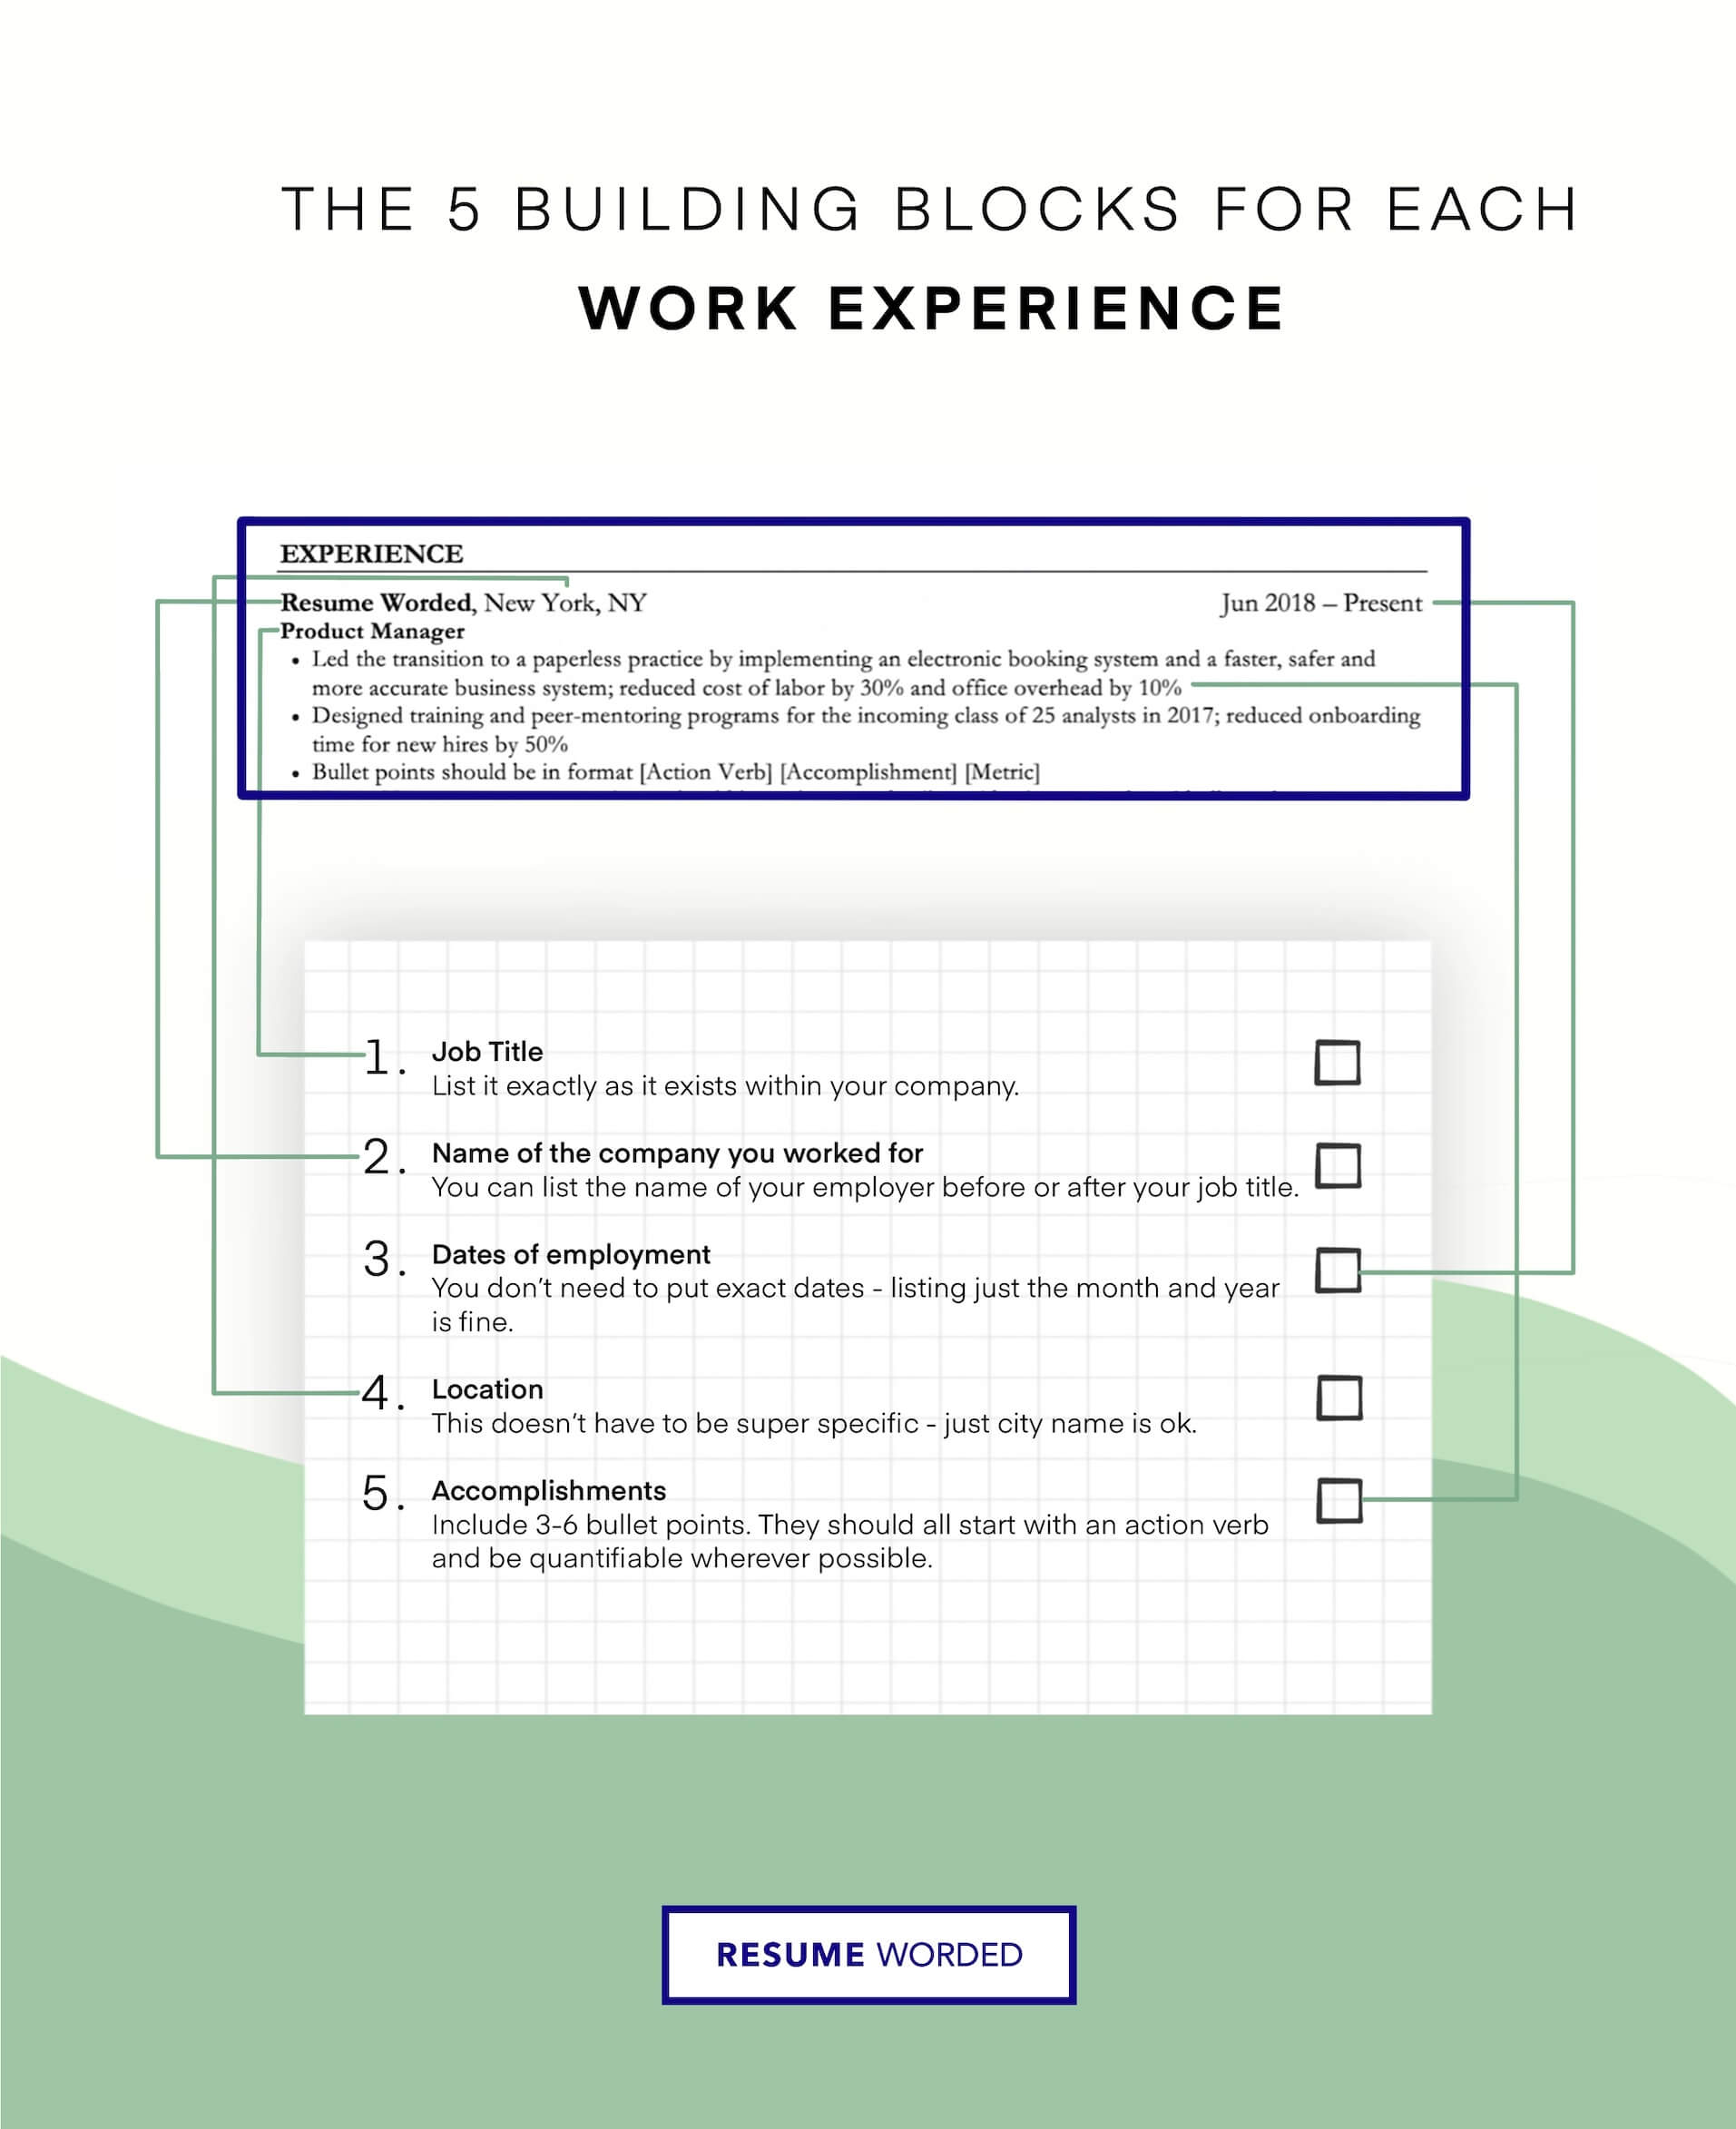 Prioritize your work experience in your resume. - Senior Director of Technology Resume